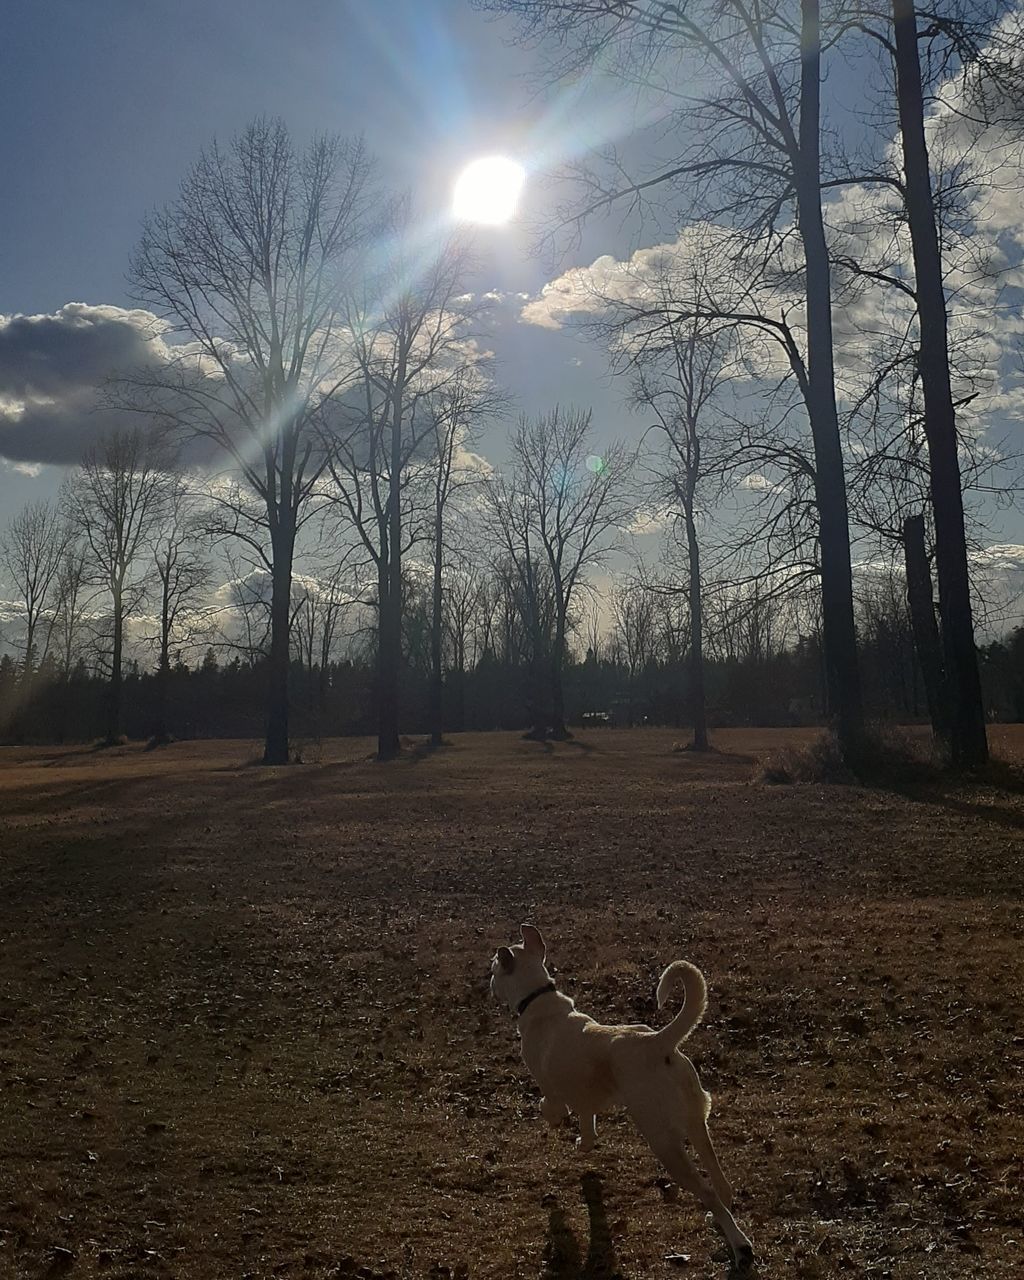 tree, morning, animal, animal themes, sky, nature, sunlight, dog, mammal, plant, no people, sun, bare tree, one animal, land, winter, environment, animal wildlife, landscape, domestic animals, sunbeam, wildlife, outdoors, rural area, field, beauty in nature, lens flare, carnivore, cloud, pet, canine